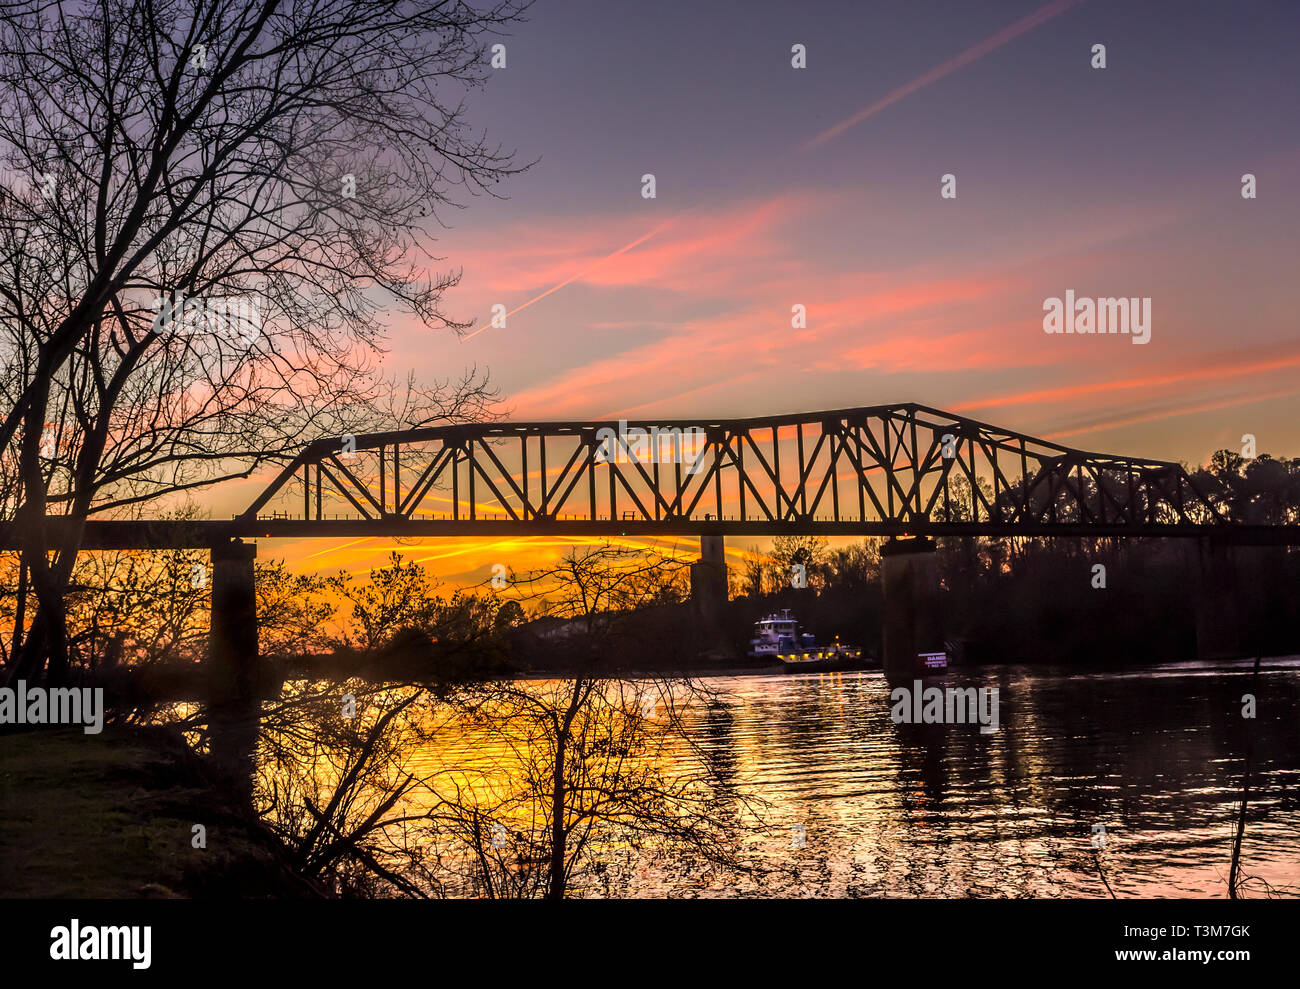 The sun sets on the M&O Railroad trestle, viewed from the Tuscaloosa Riverwalk, March 18, 2014, in Tuscaloosa, Alabama. Stock Photo